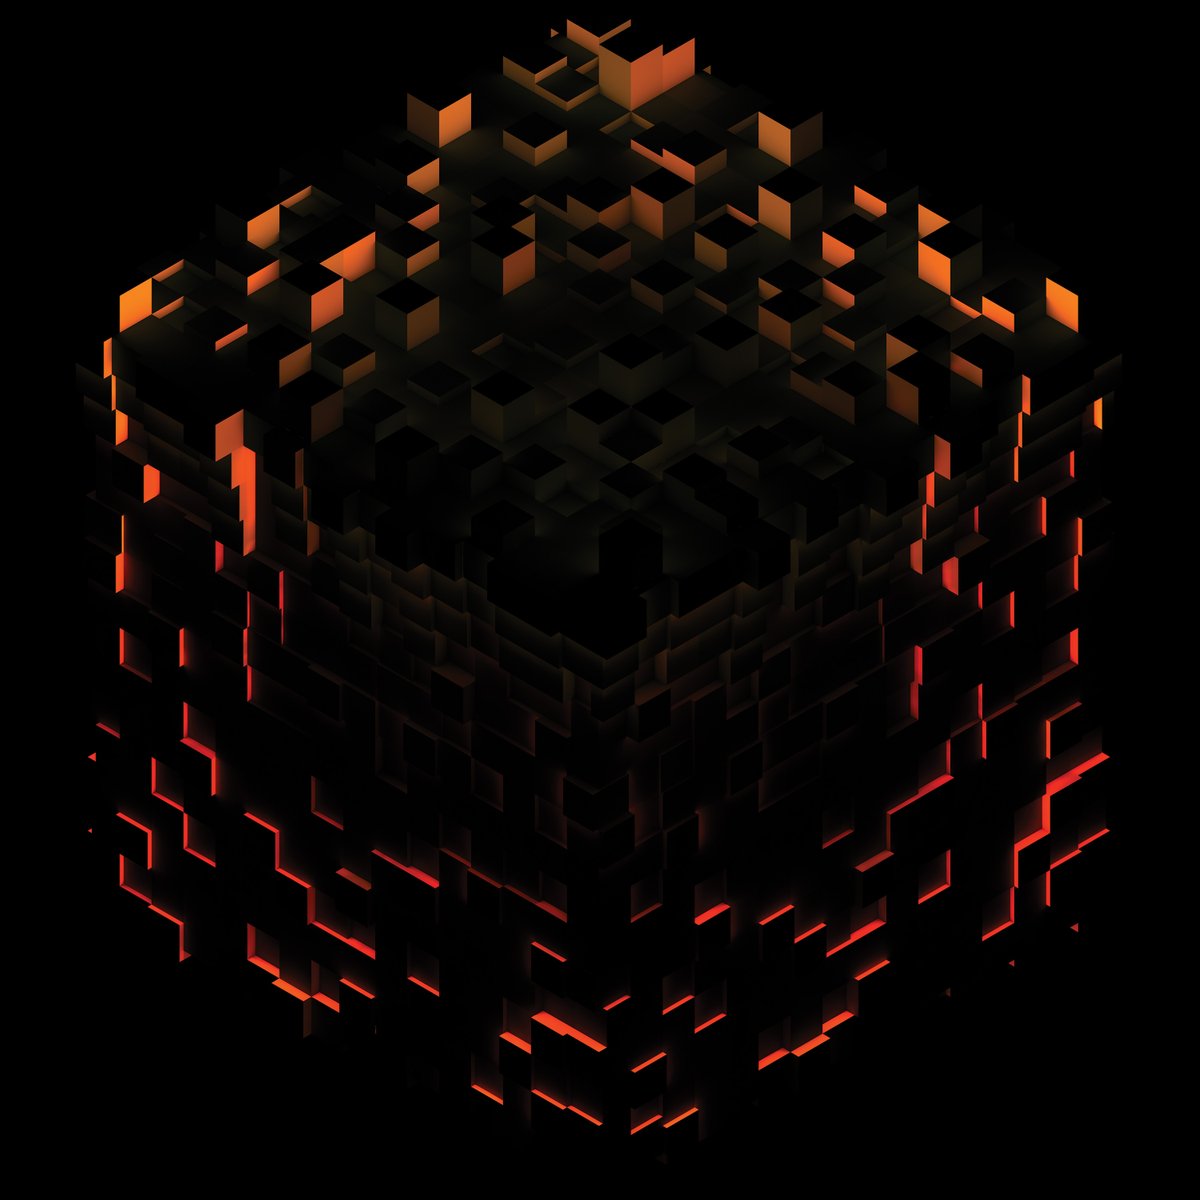 Vinyl and CD restocks for @C418's Minecraft Alpha and Beta are coming soon. Standby for details or join our mailing list: eepurl.com/b2Qws1